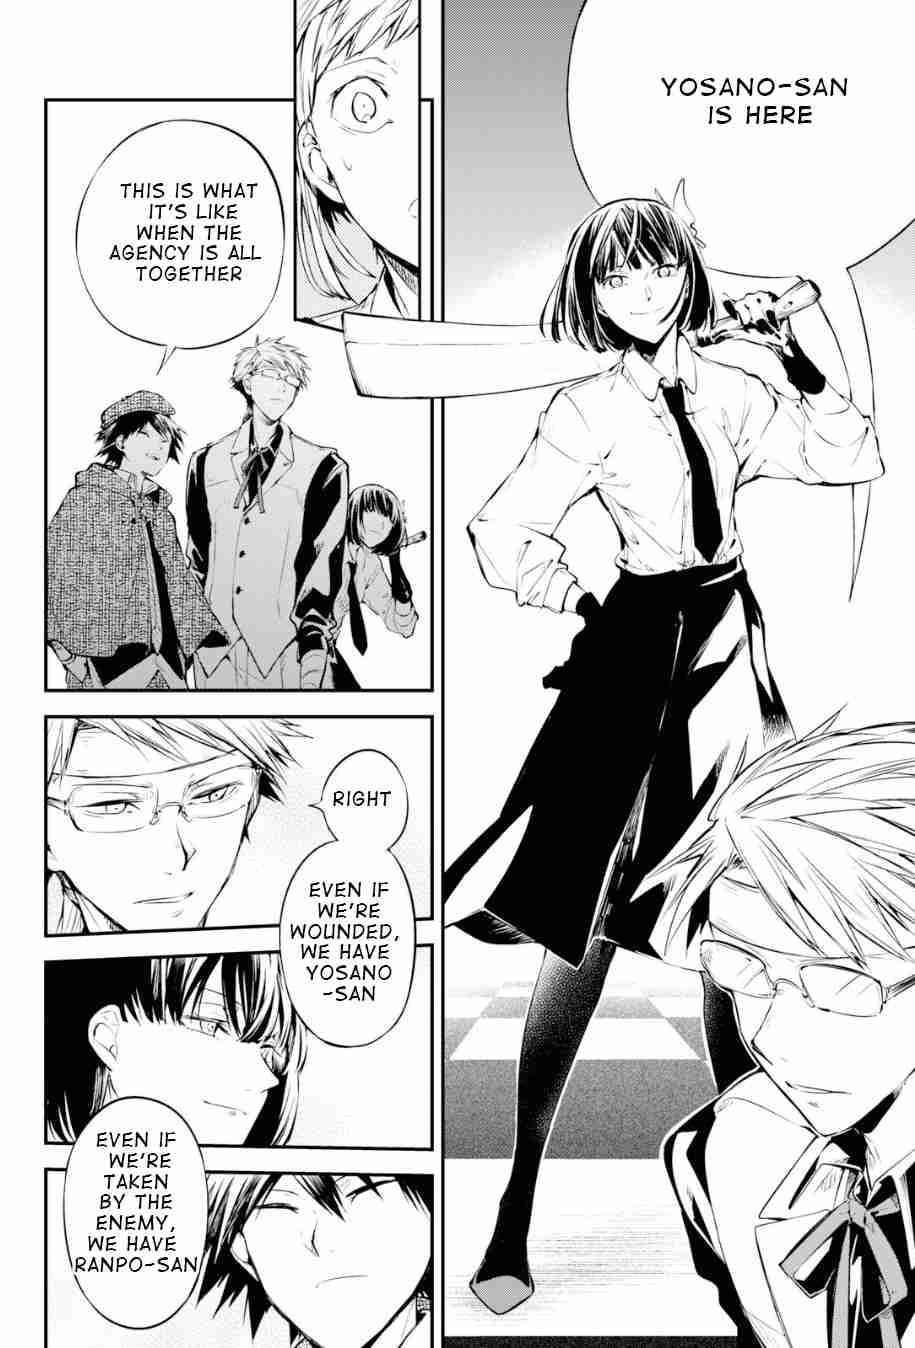 Bungo Stray Dogs Ch. 81 The Strongest Man, Final Part